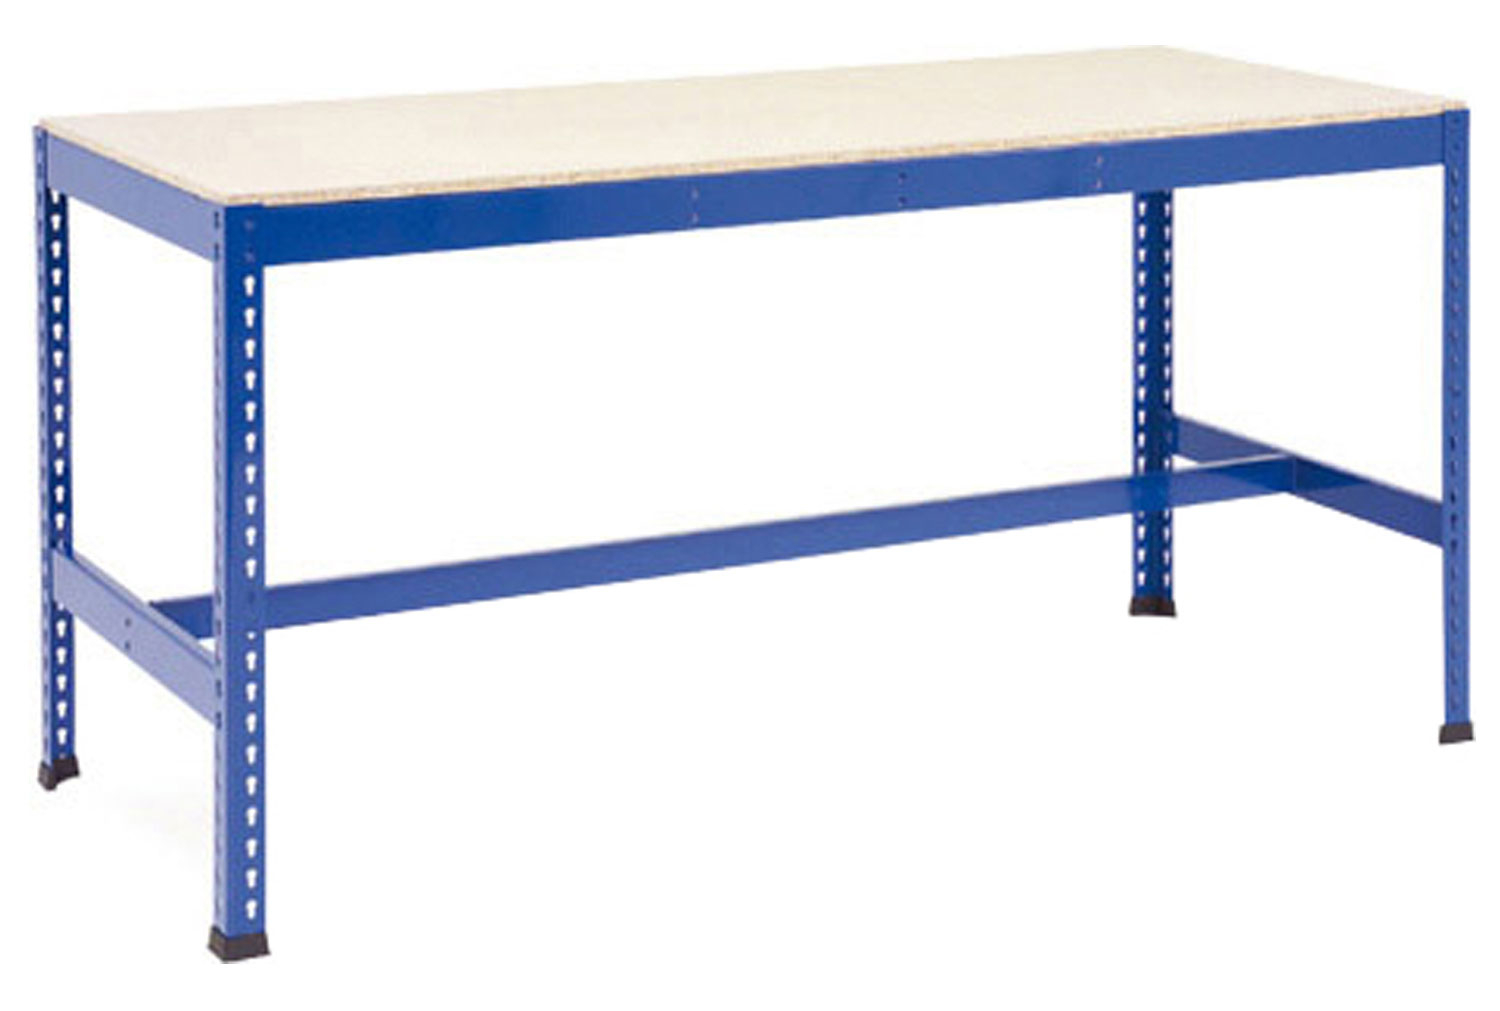 Rapid 1 Heavy Duty Workbench With T Bar Support (Blue), 1830wx760d (mm), Express Delivery